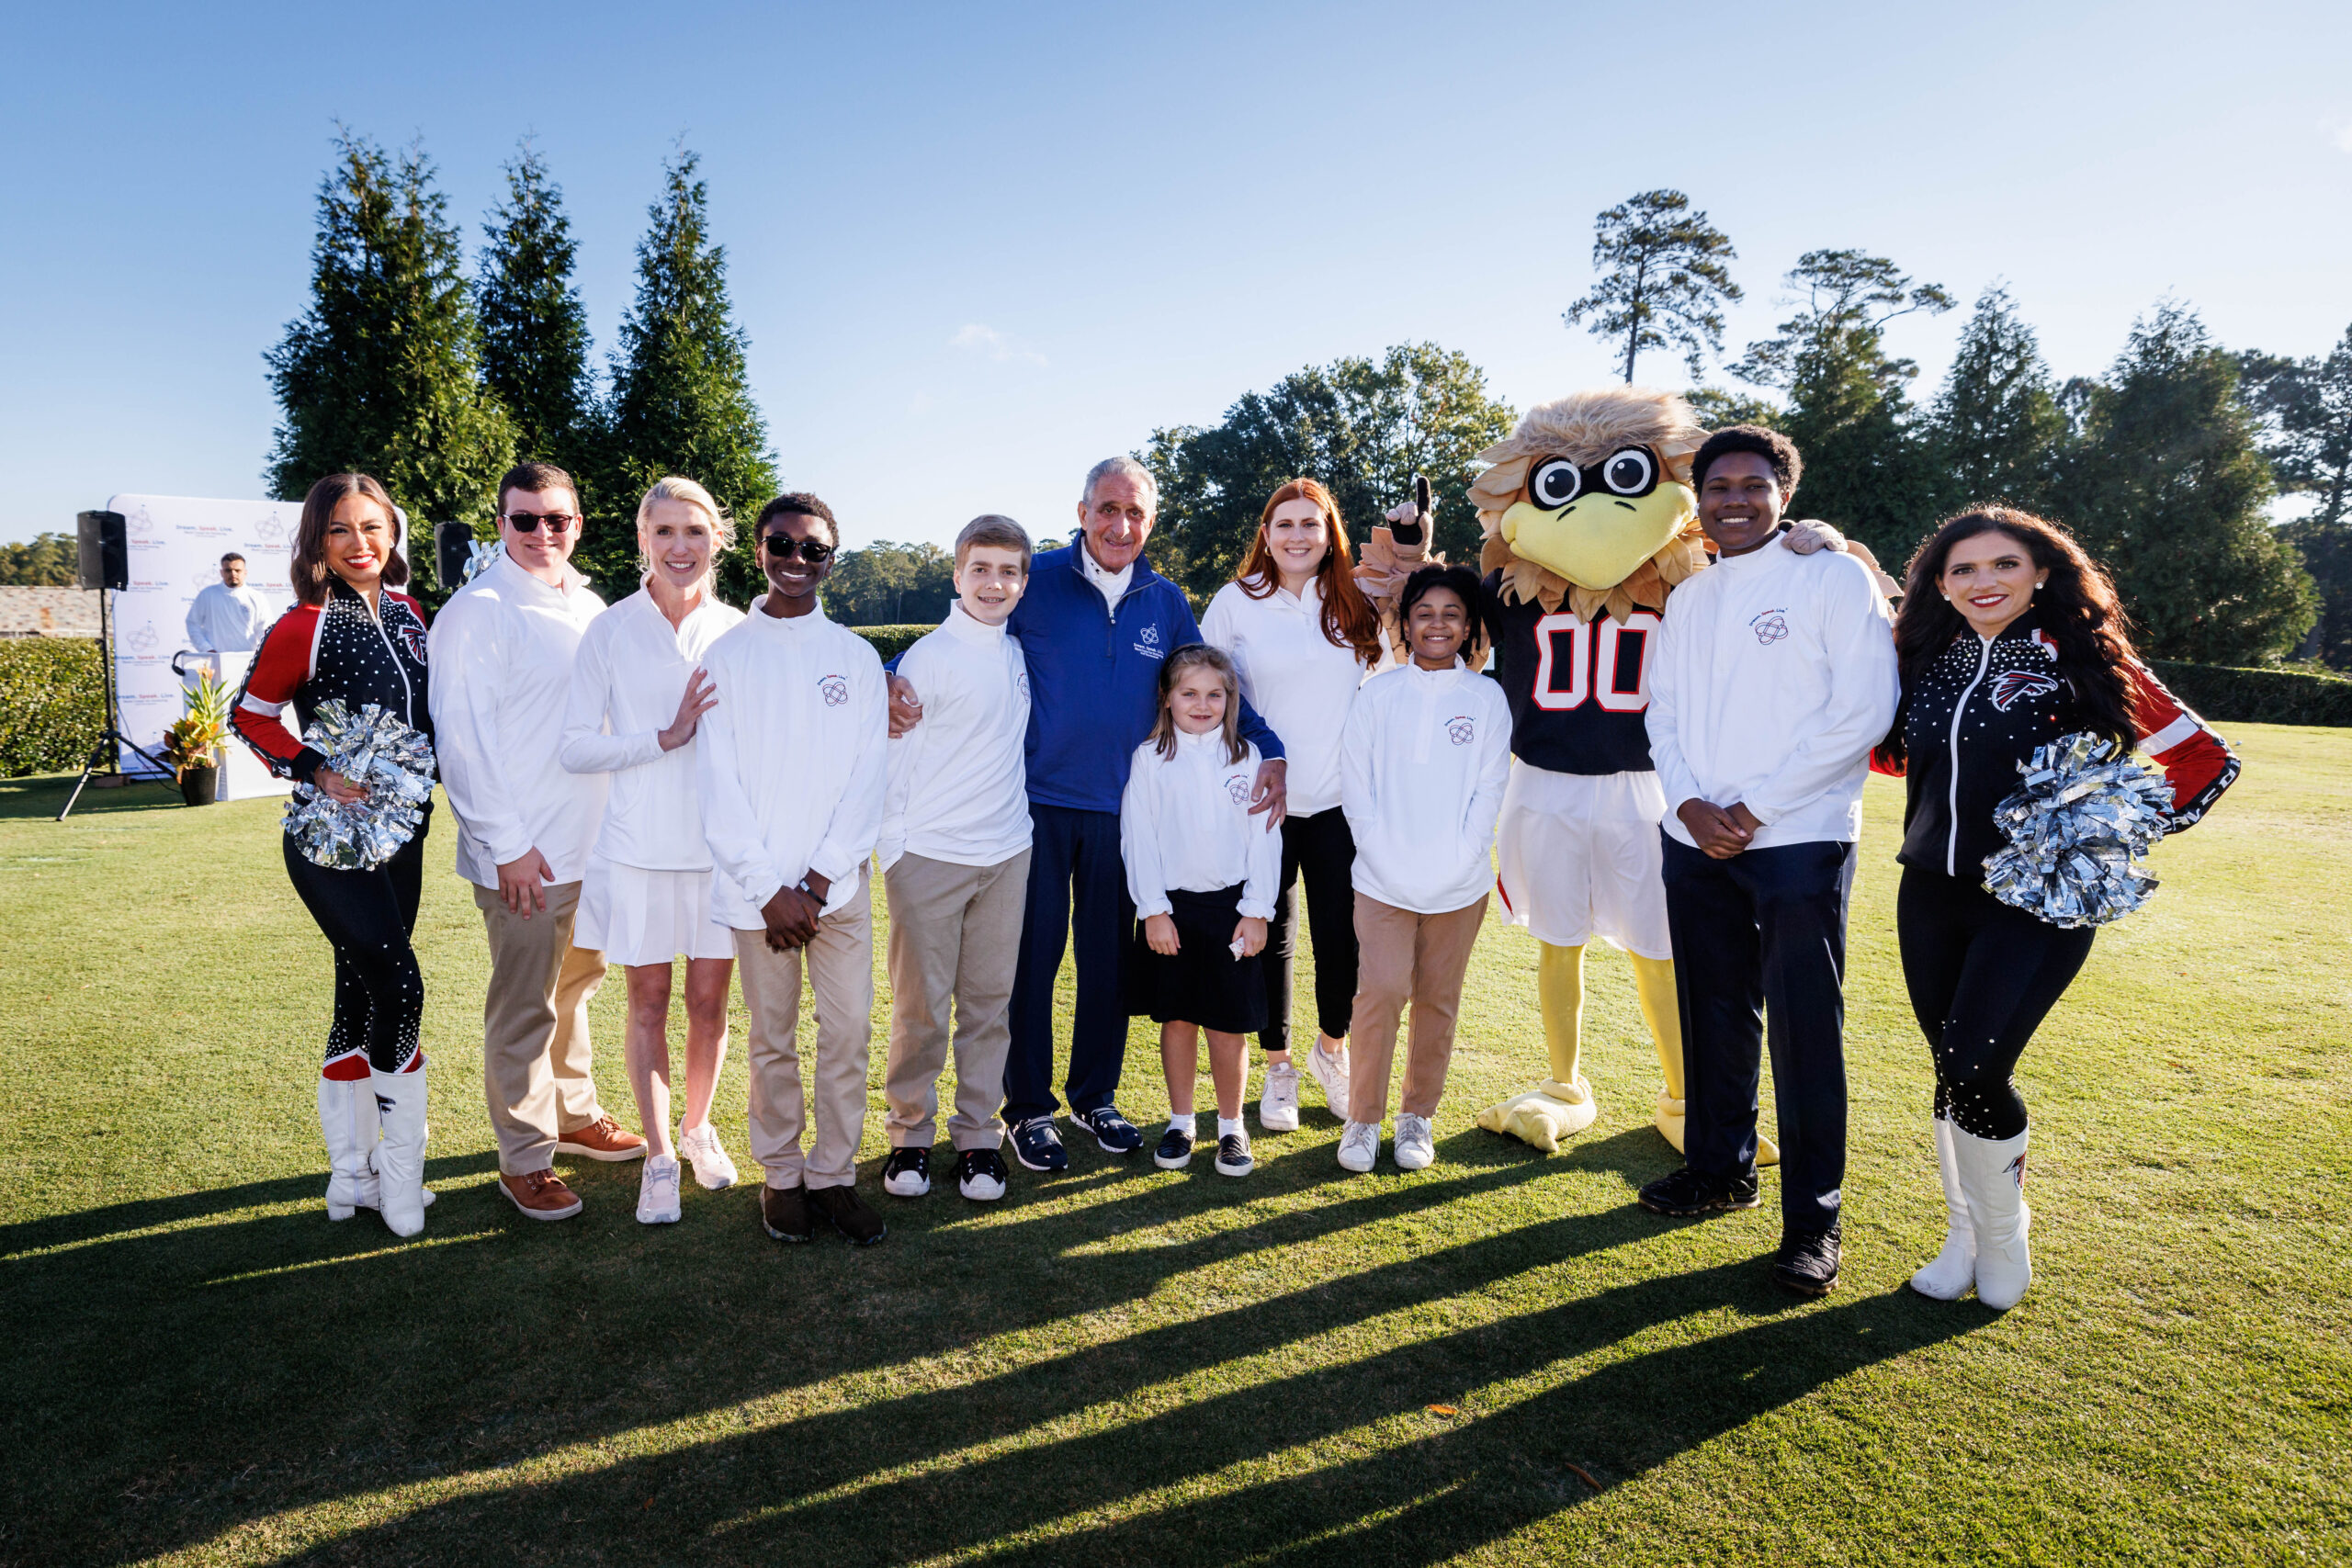 Second Annual Arthur M. Blank Center for Stuttering Celebrity Golf Tournament Raises Over $400,000 for Stuttering Education and Research